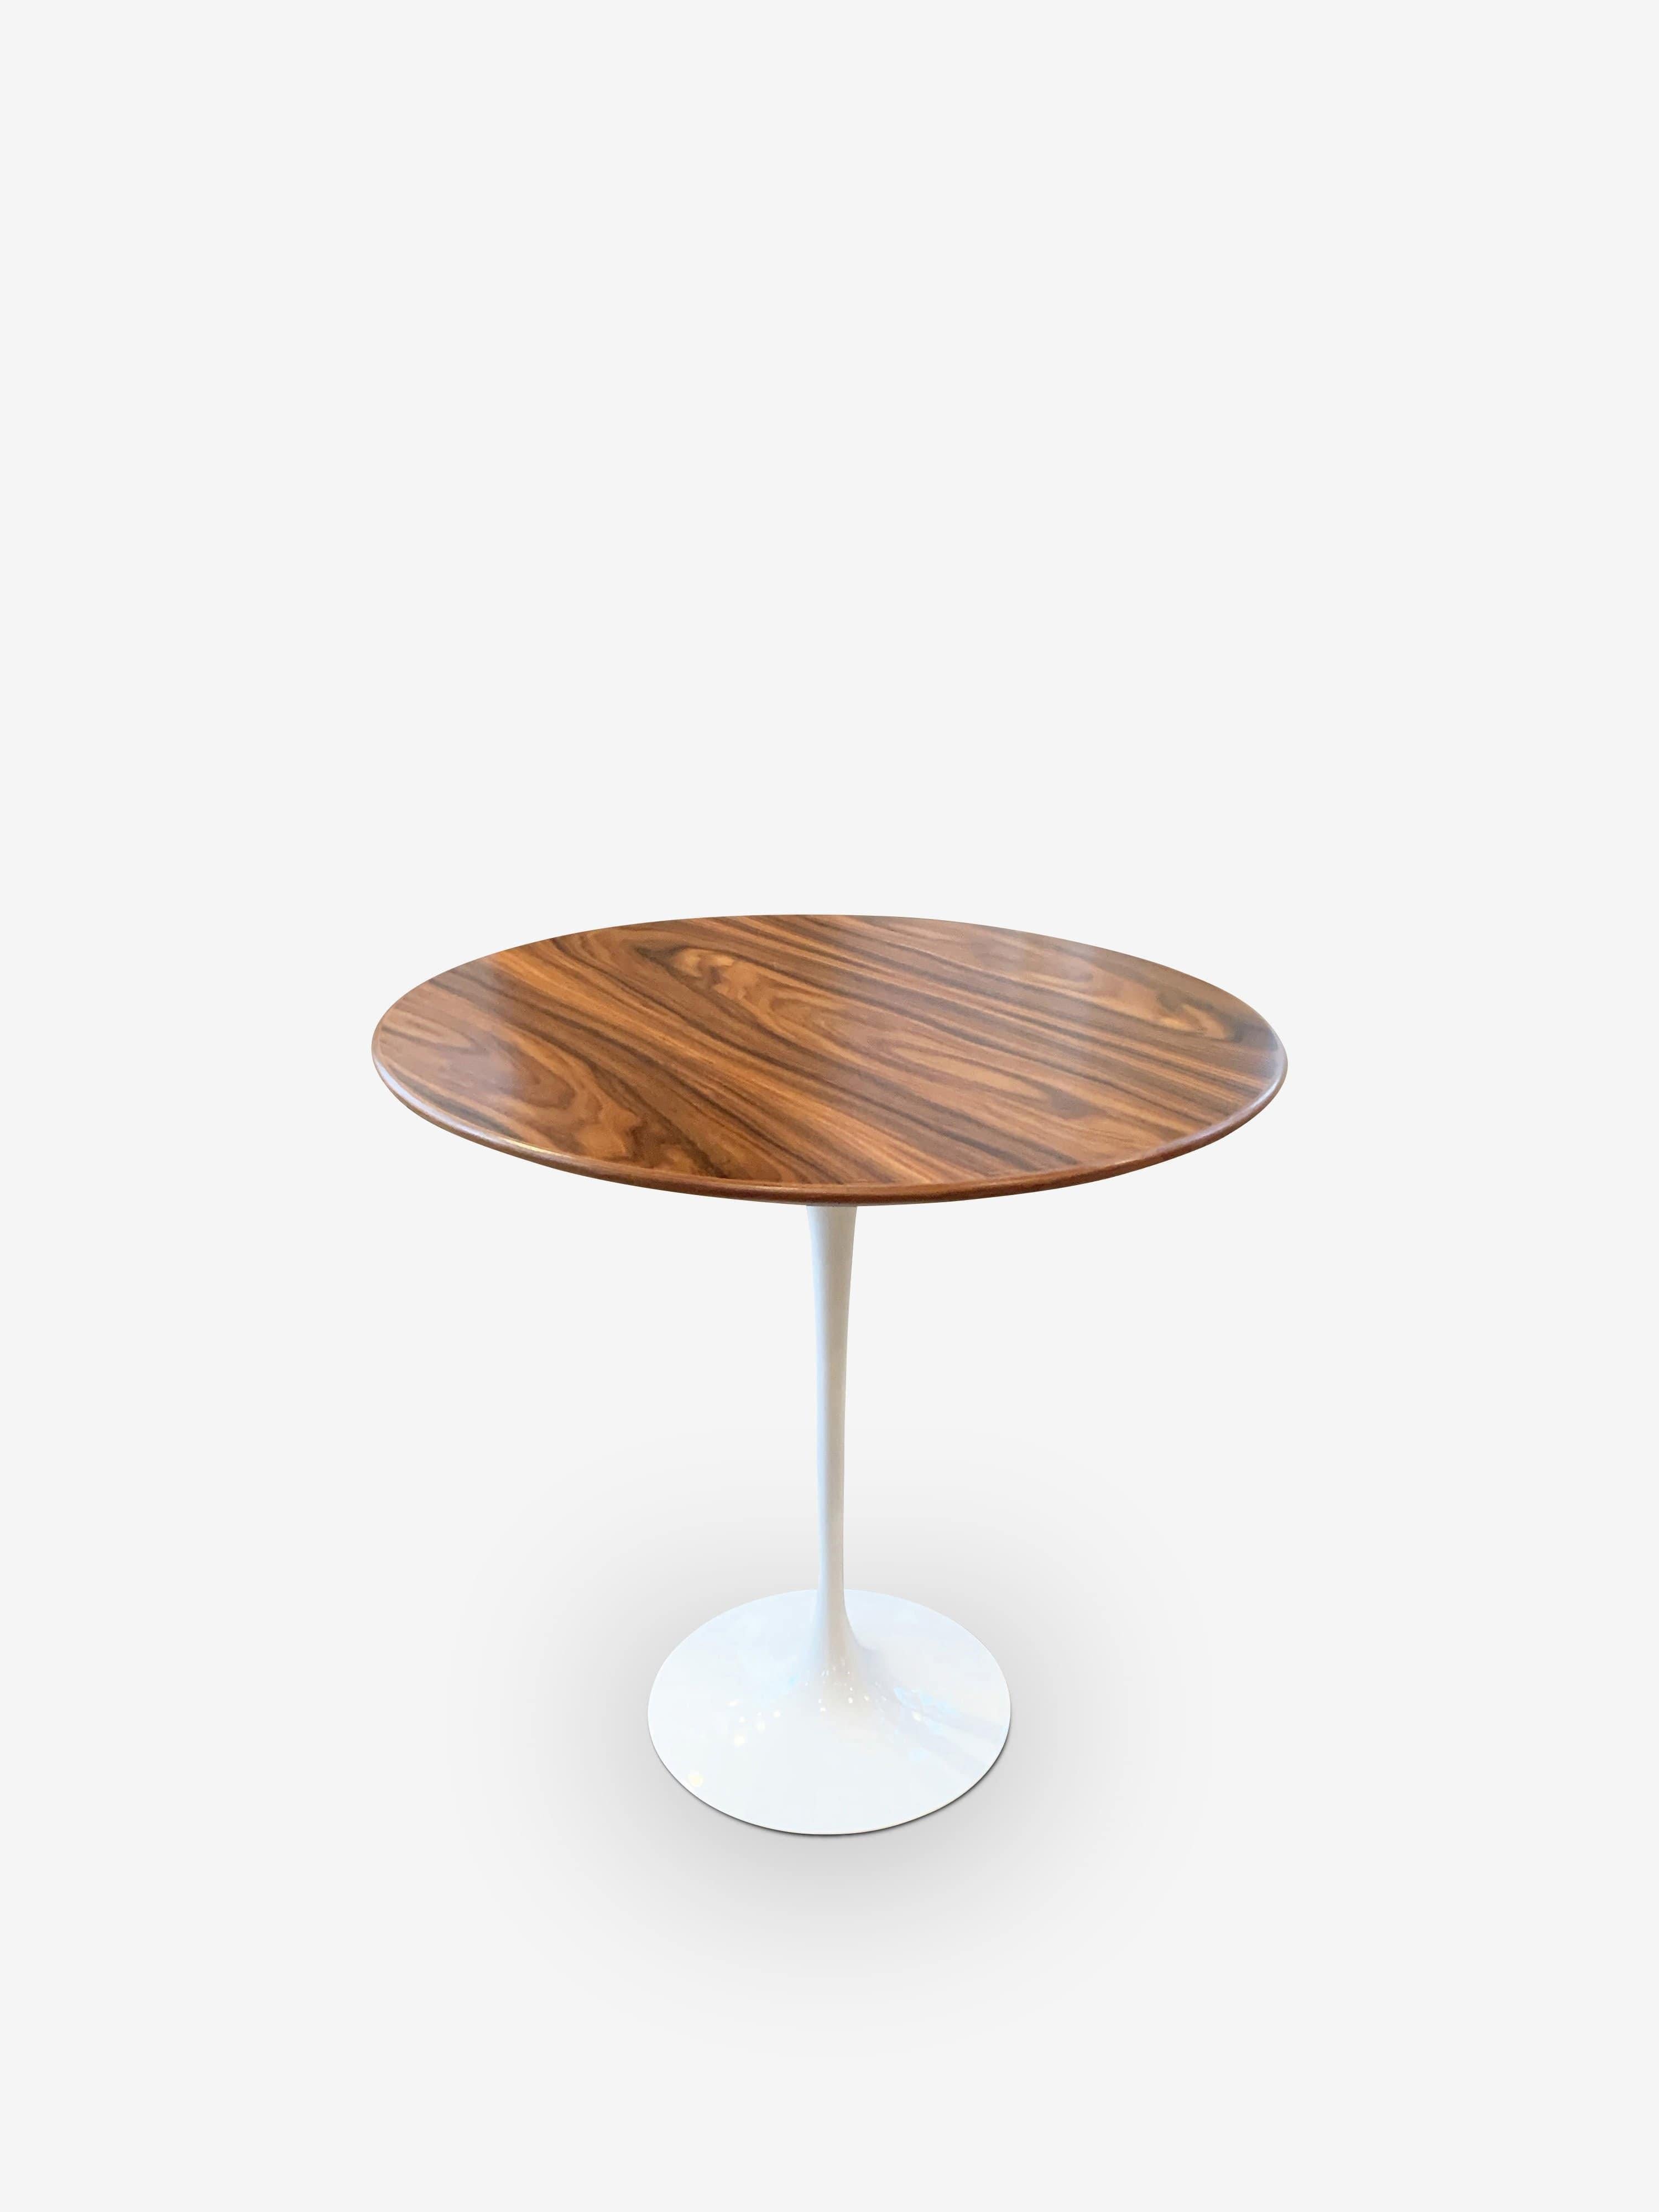 American Low Eero Saarinen Small Round Table with Rosewood Top & White Base For Sale